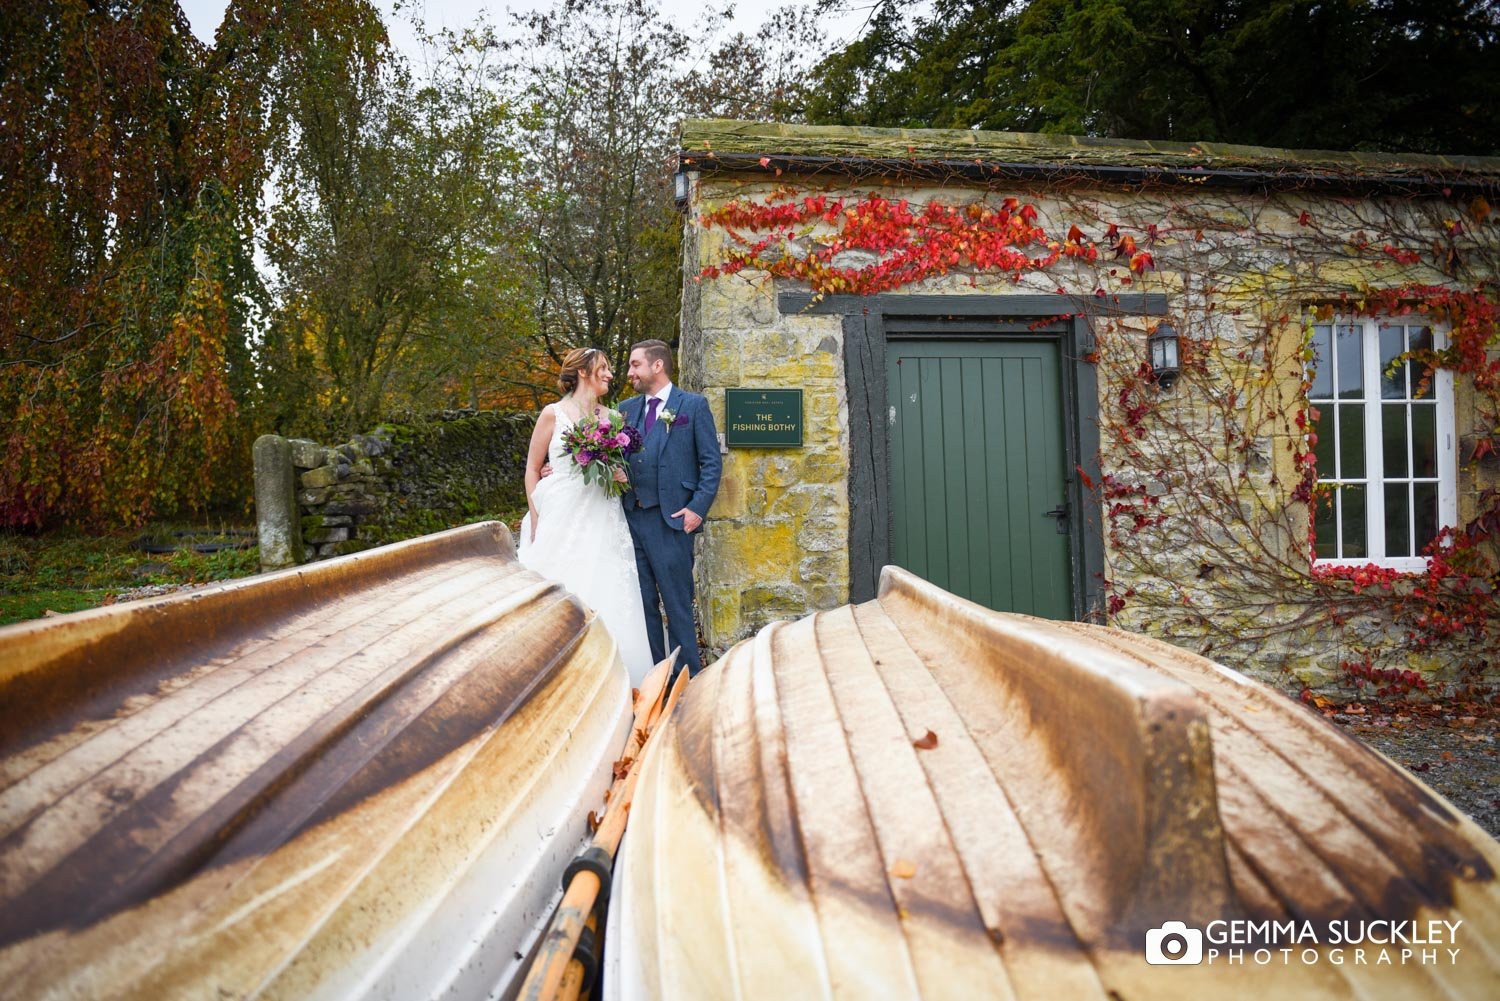 the bride and groom at the boat house at conison lake in skipton